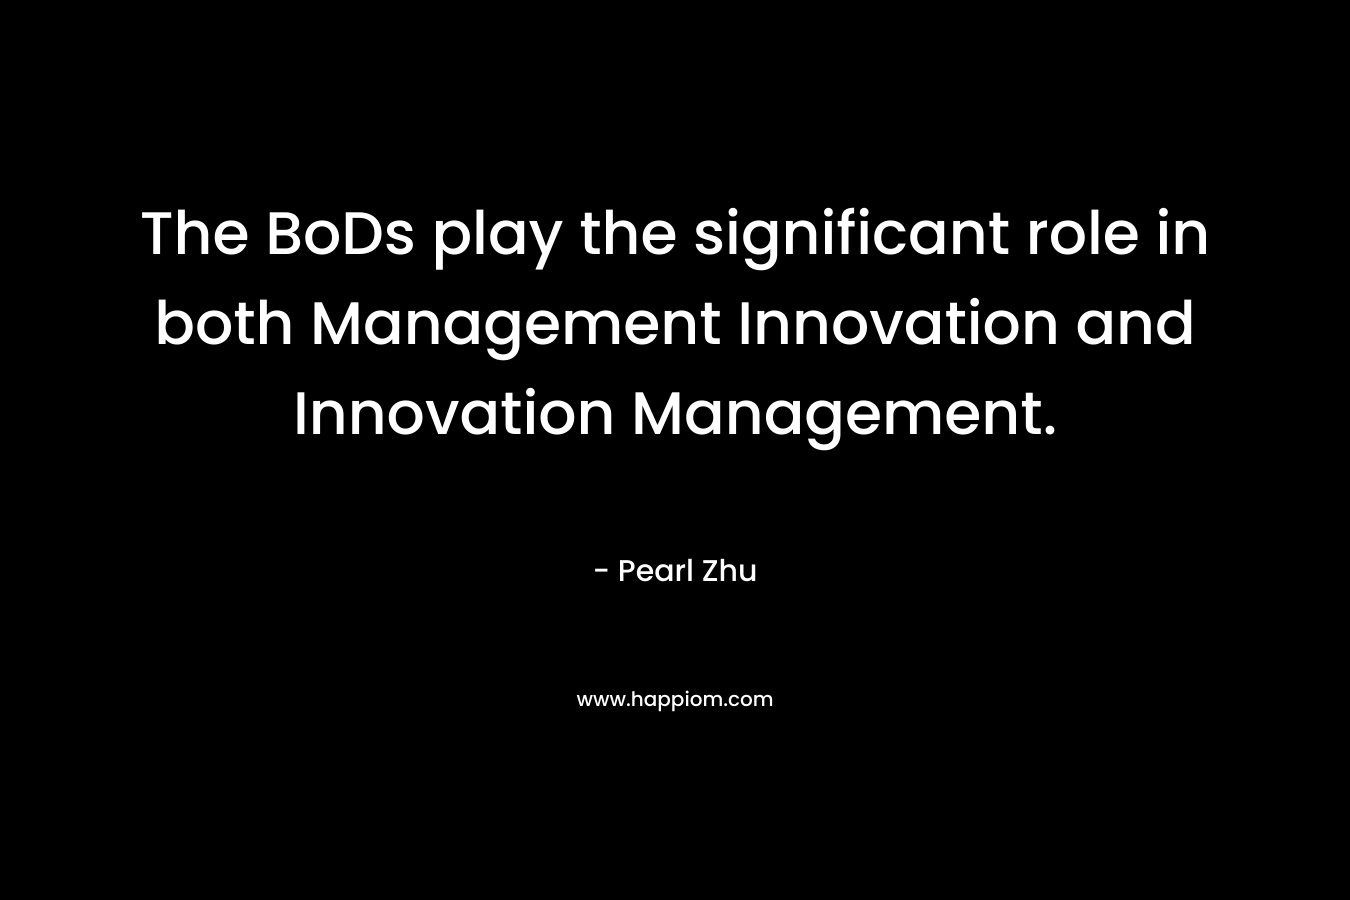 The BoDs play the significant role in both Management Innovation and Innovation Management. – Pearl Zhu